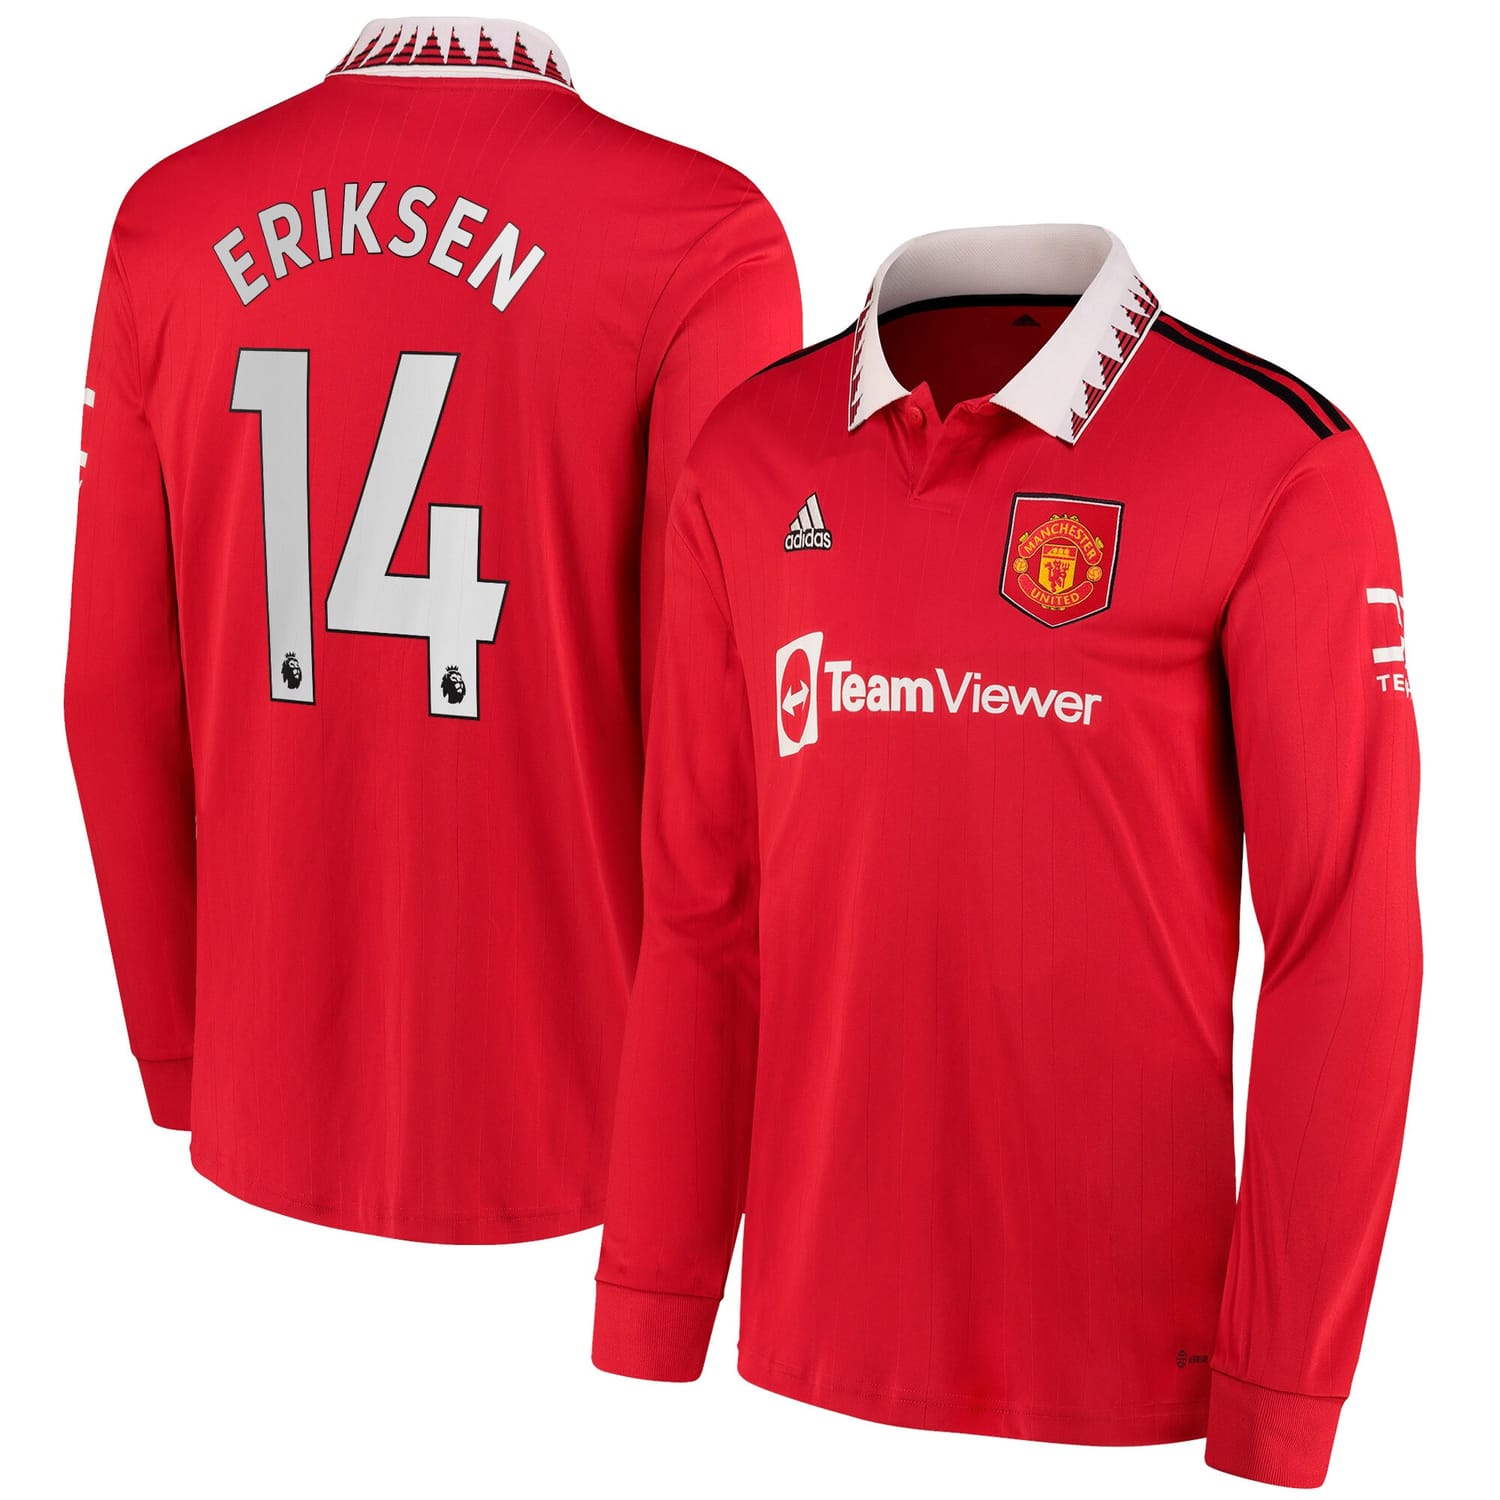 Premier League Manchester United Home Jersey Shirt Long Sleeve Red 2022-23 player Christian Eriksen printing for Men